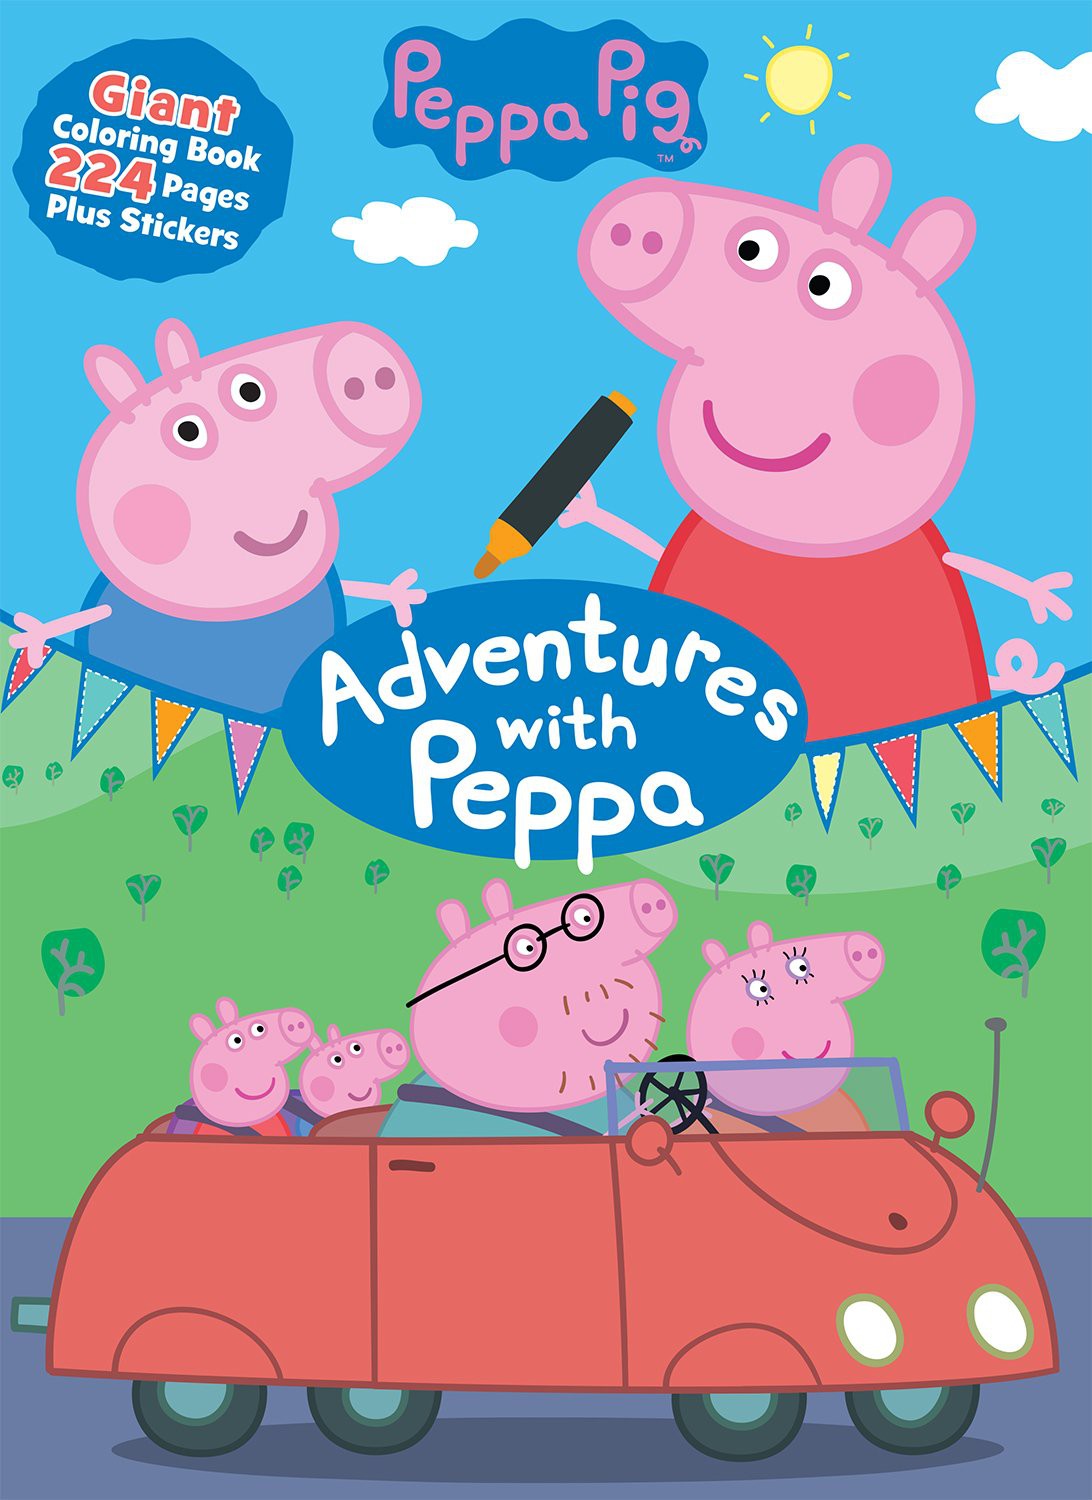 Peppa Pig Coloring Book Giant Size 224 Pages Paperback Edition Includes Stickers